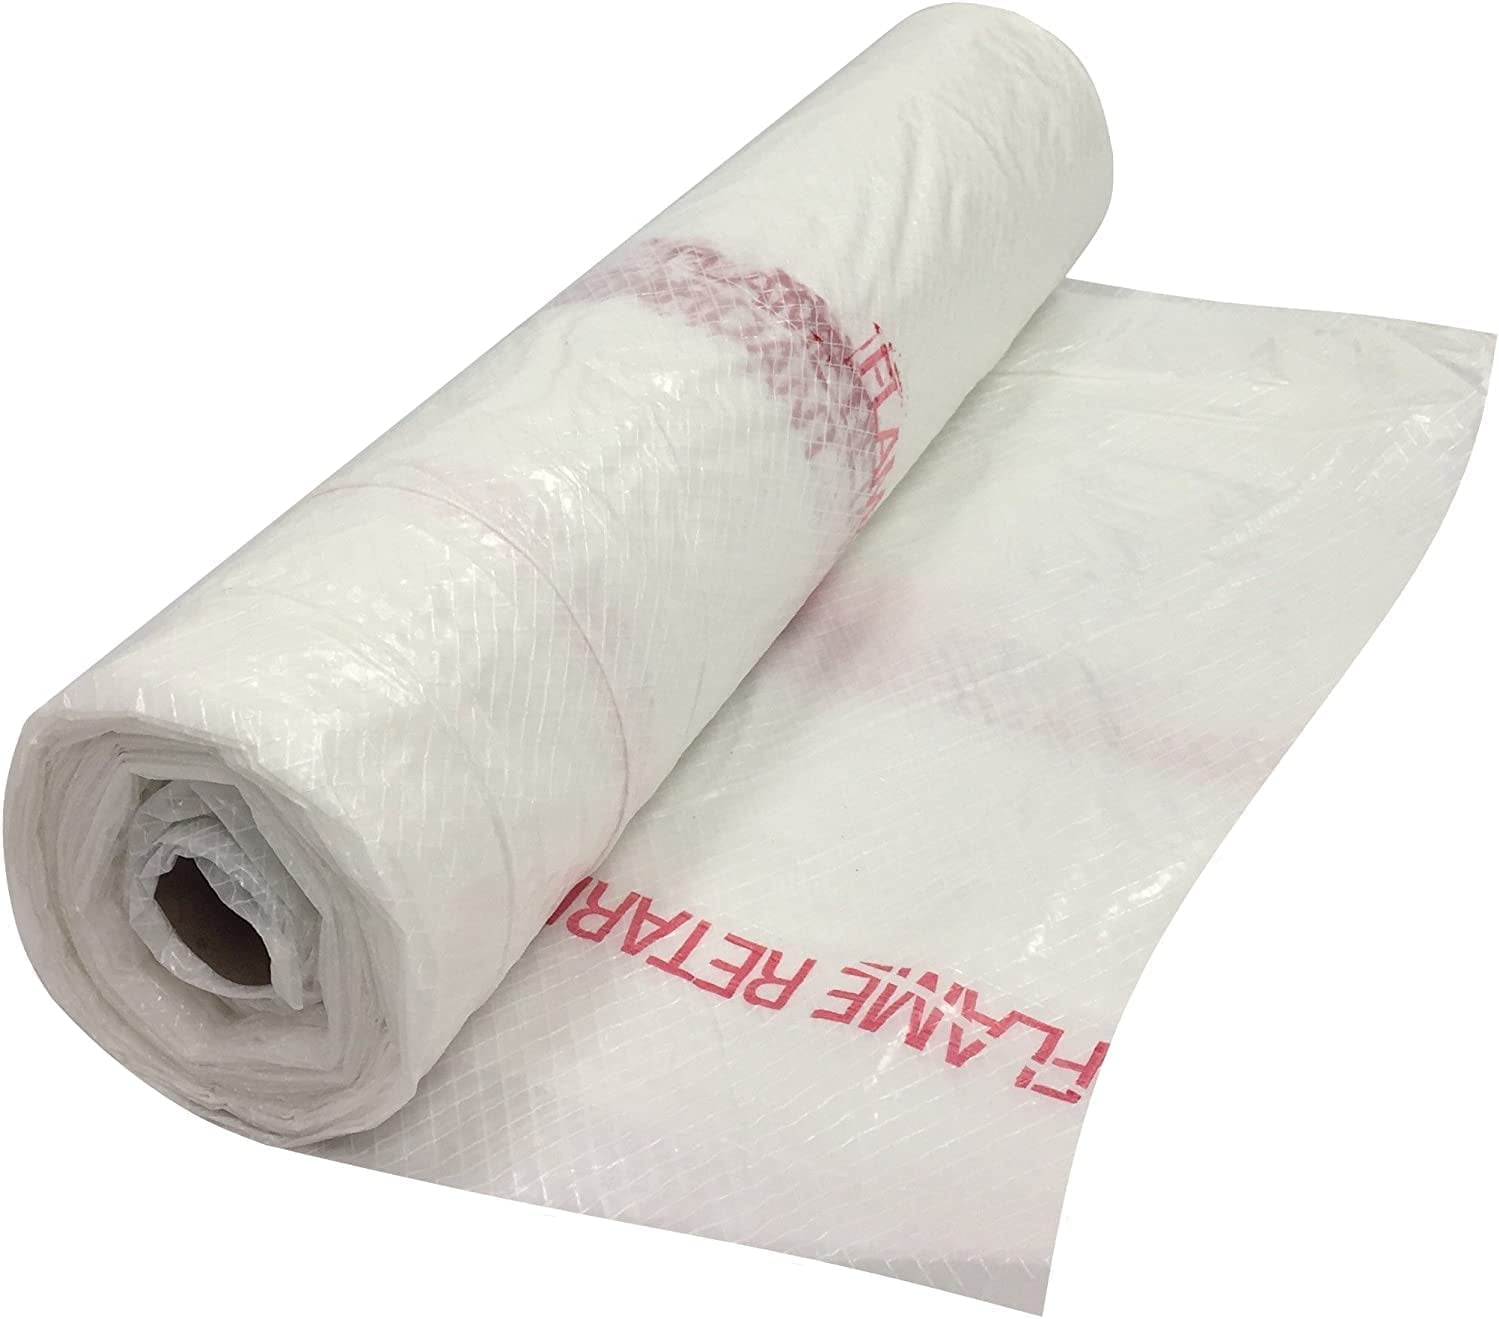 Woven Reinforced Clear Poly Film Sheets | by Tarps Now